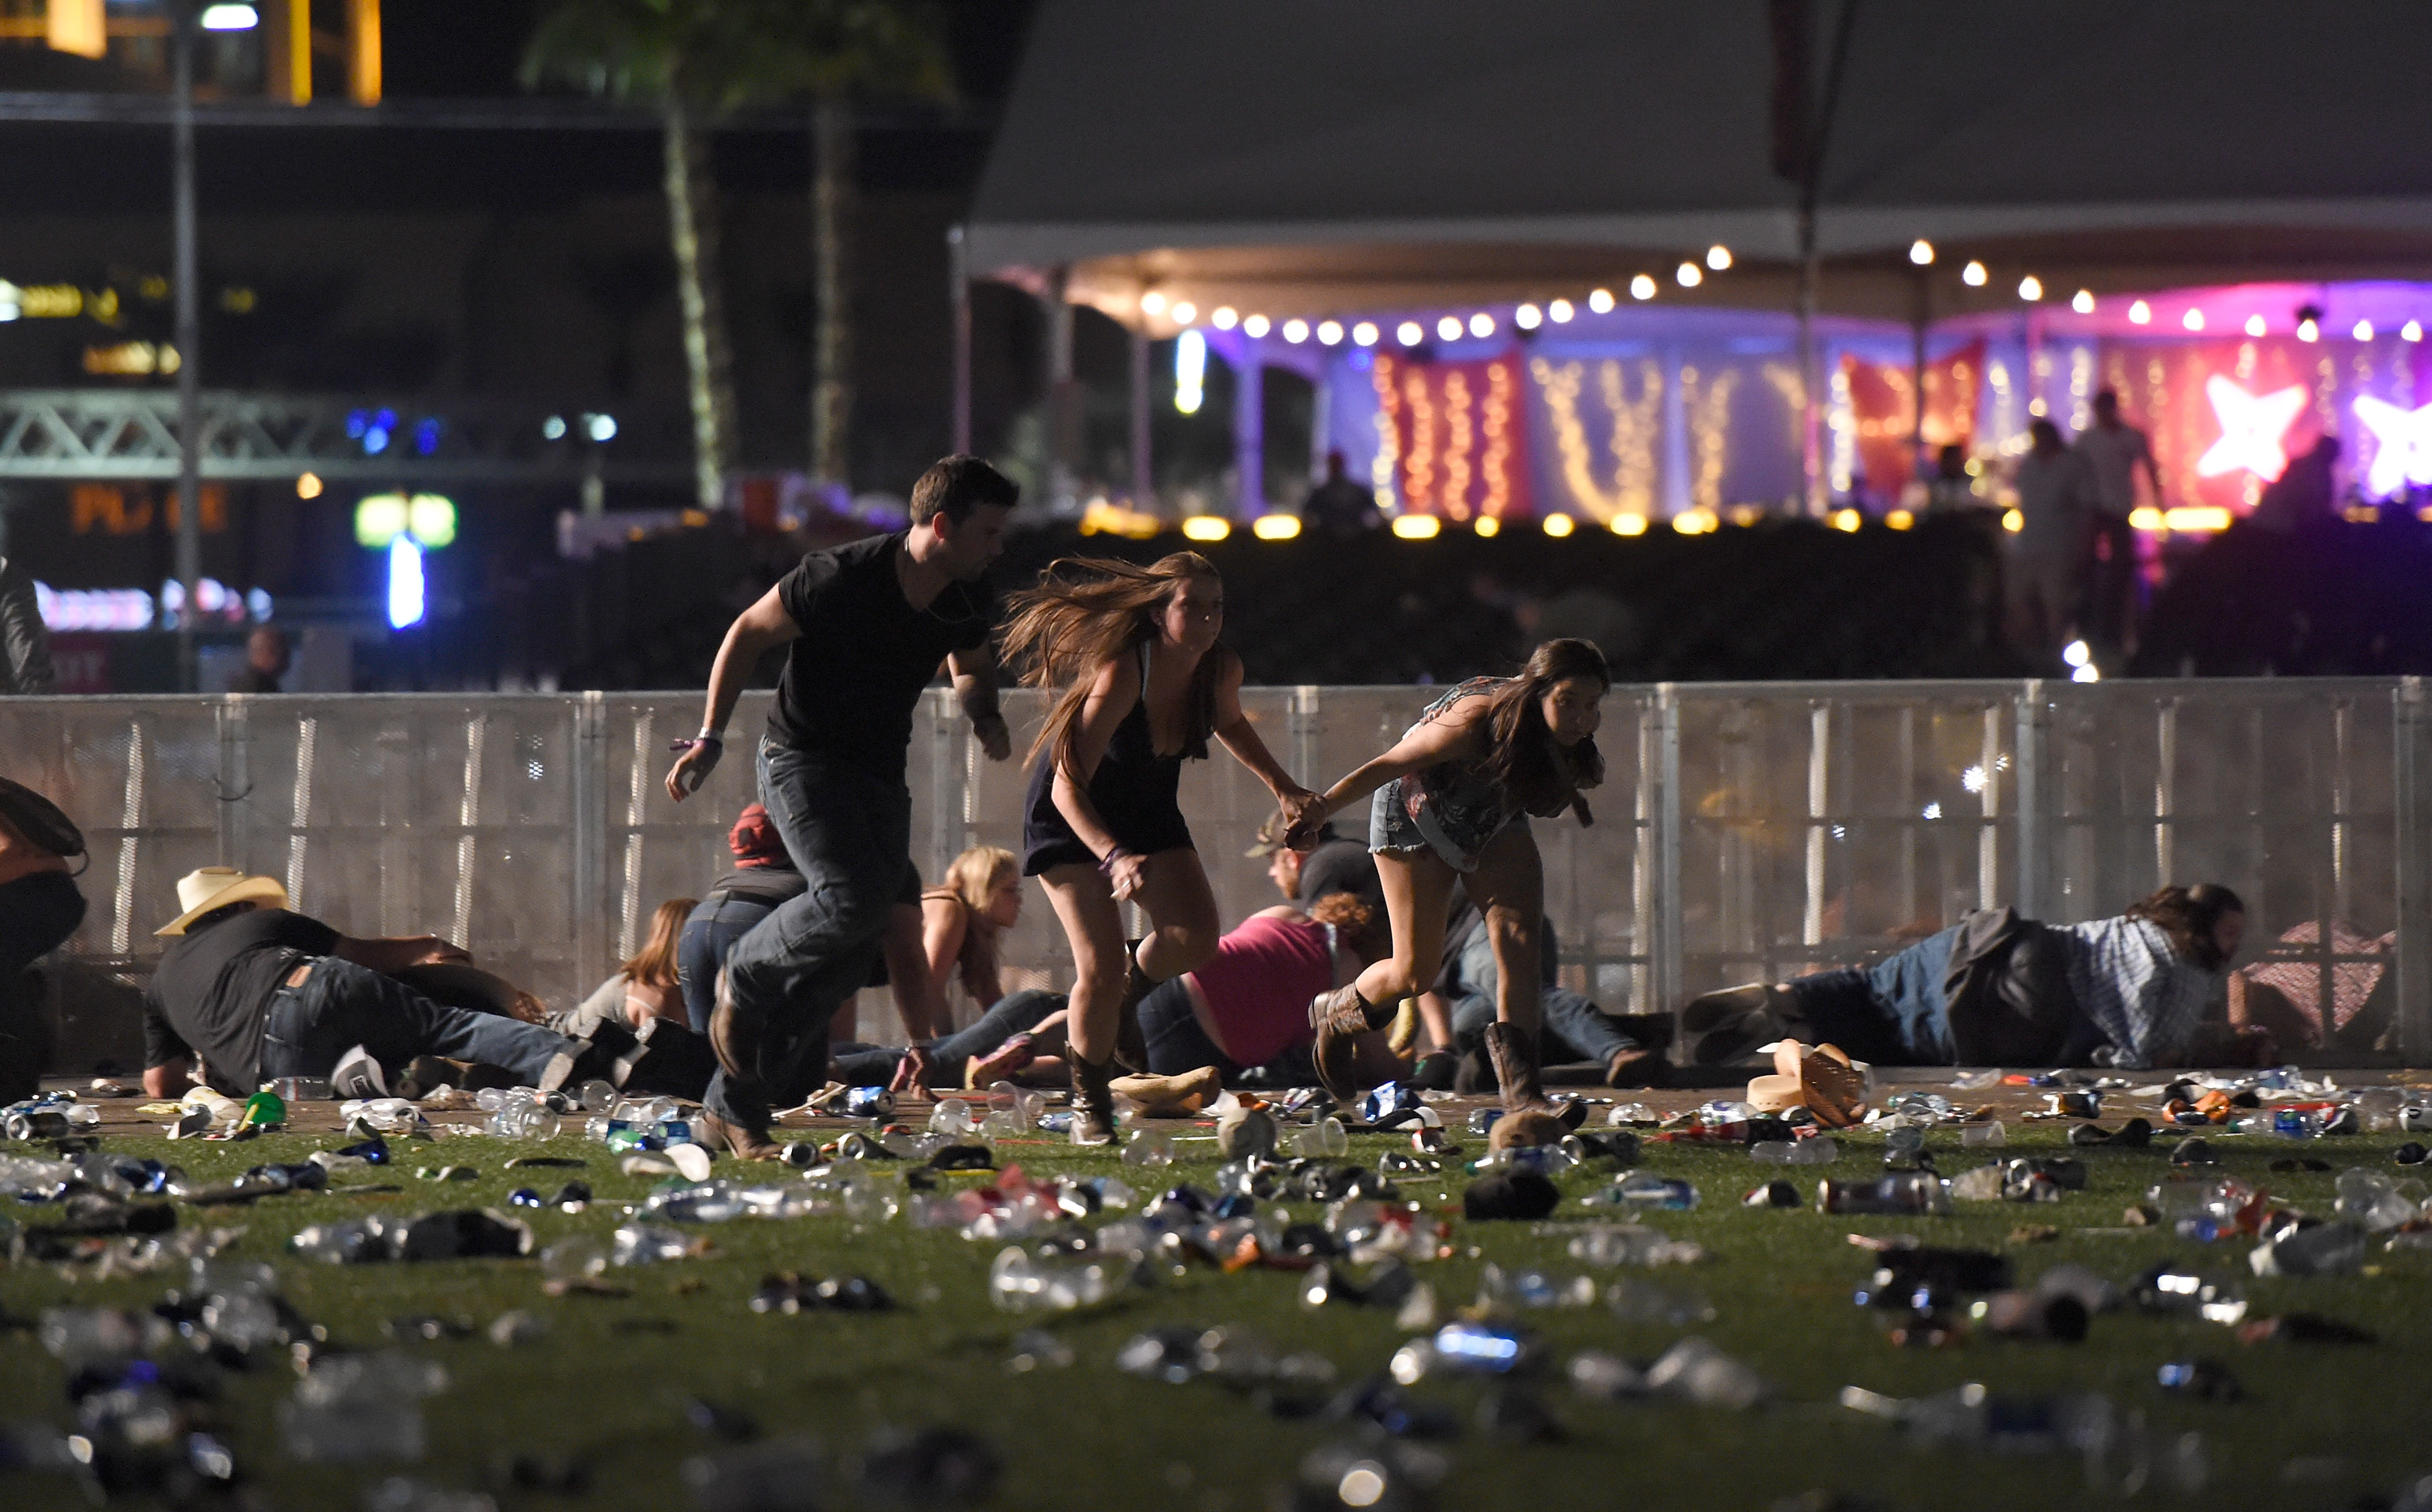 Las Vegas Police Release Audio of Route 91 Concert 911 Calls | Time